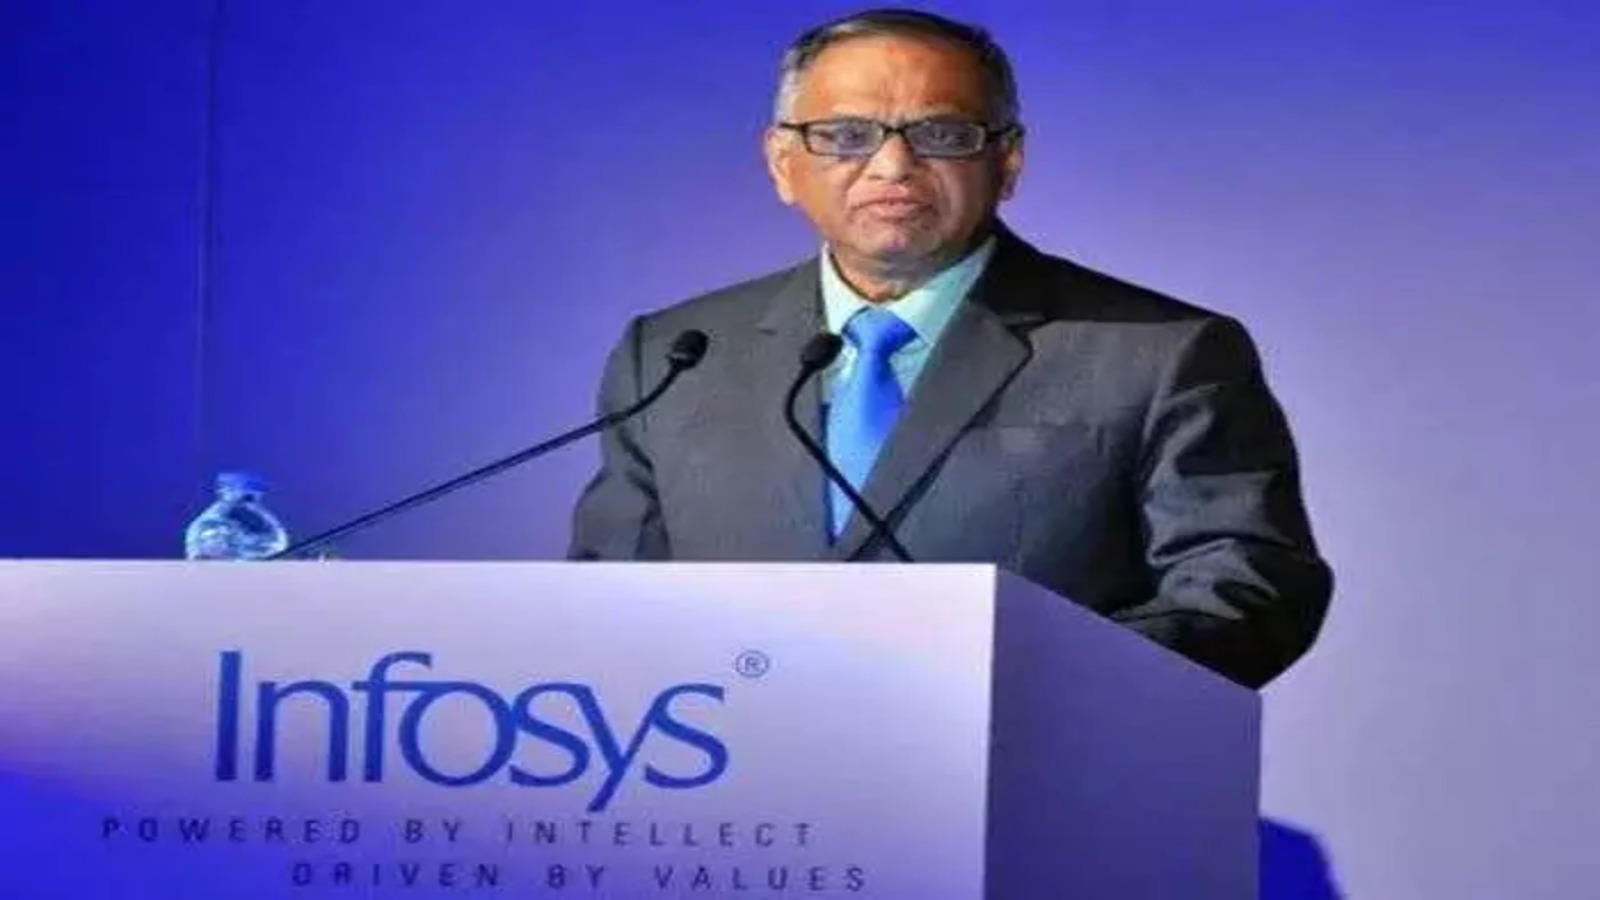 Infosys founder Narayan Murthy has gifted Infosys shares worth Rs 240 crore to his grandson.